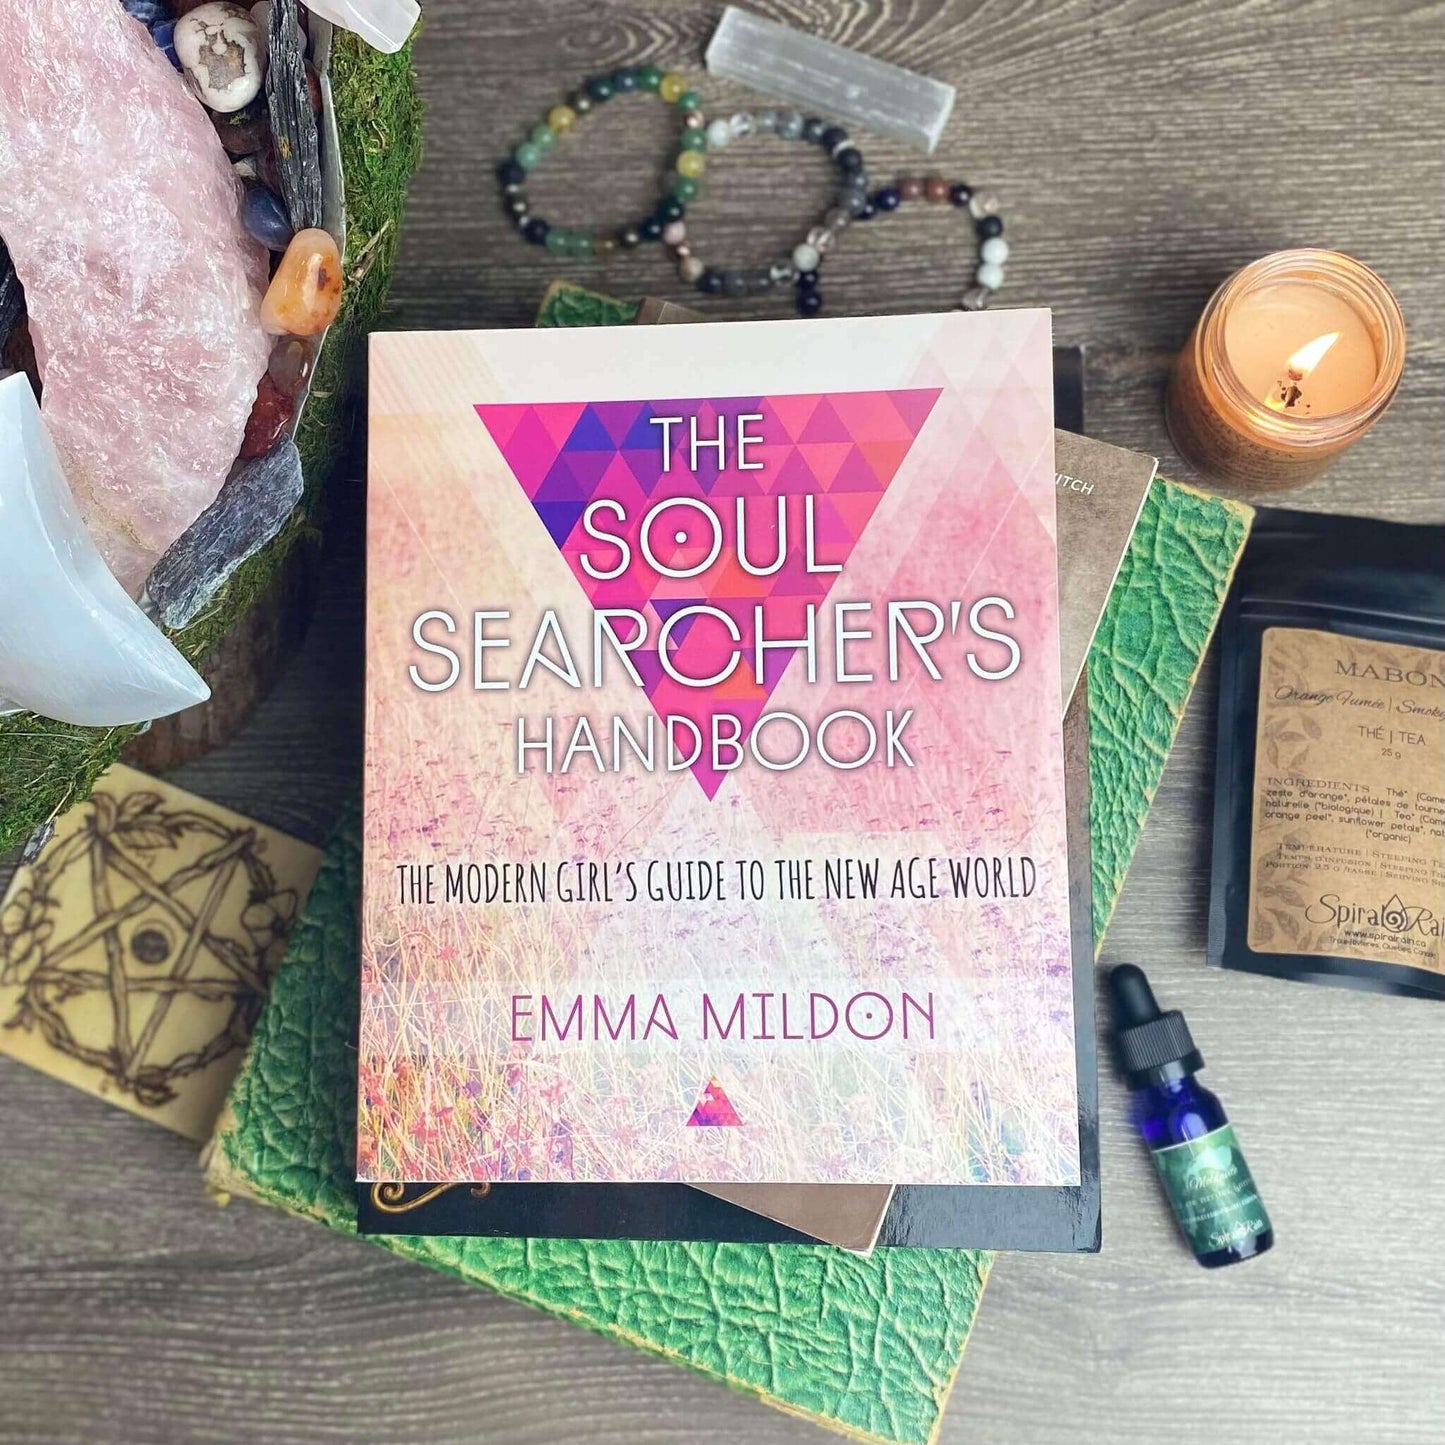 THE SOUL SEARCHER'S HANDBOOK: A MODERN GIRL'S GUIDE TO THE NEW AGE WORLD at $19 only from Spiral Rain